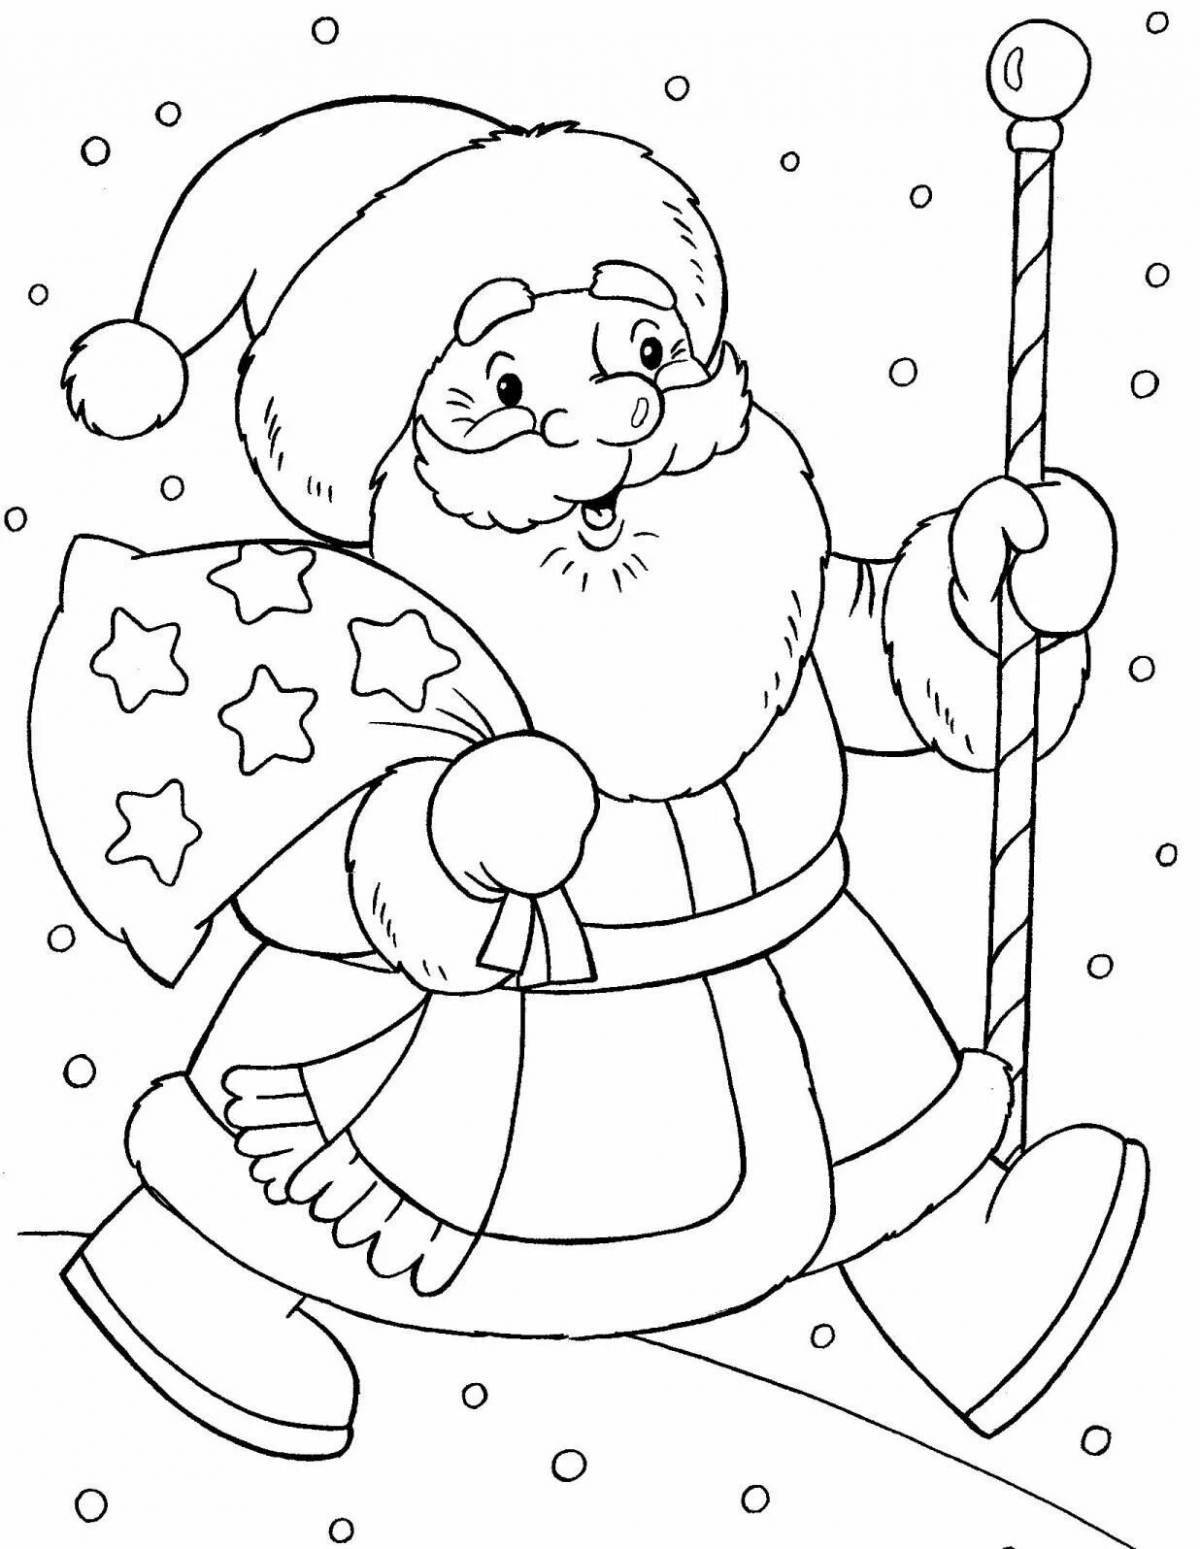 Crazy colorful Christmas drawing for kids